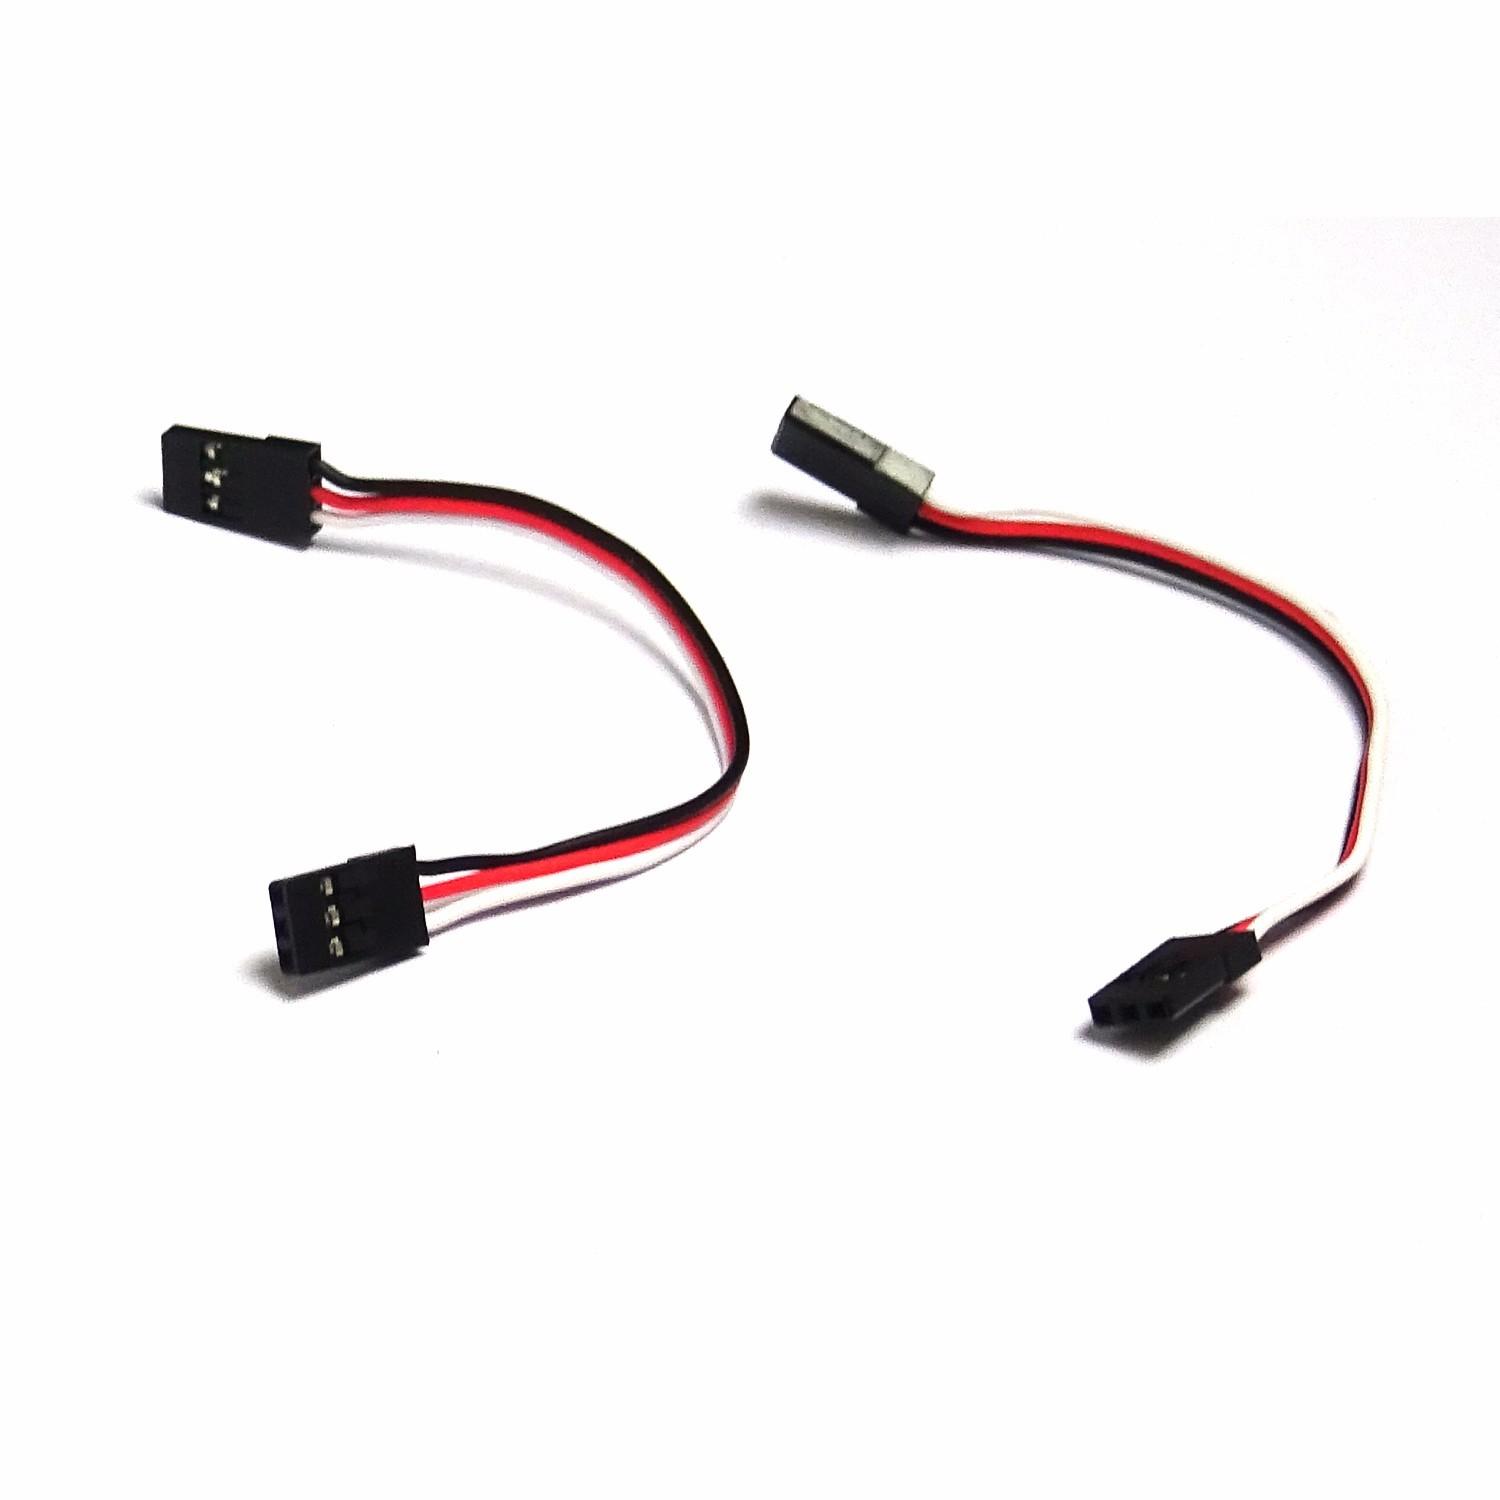 2x 100mm Servo Extension Lead Wire Cable MALE TO MALE KK MK MWC Flight Control - UK Seller